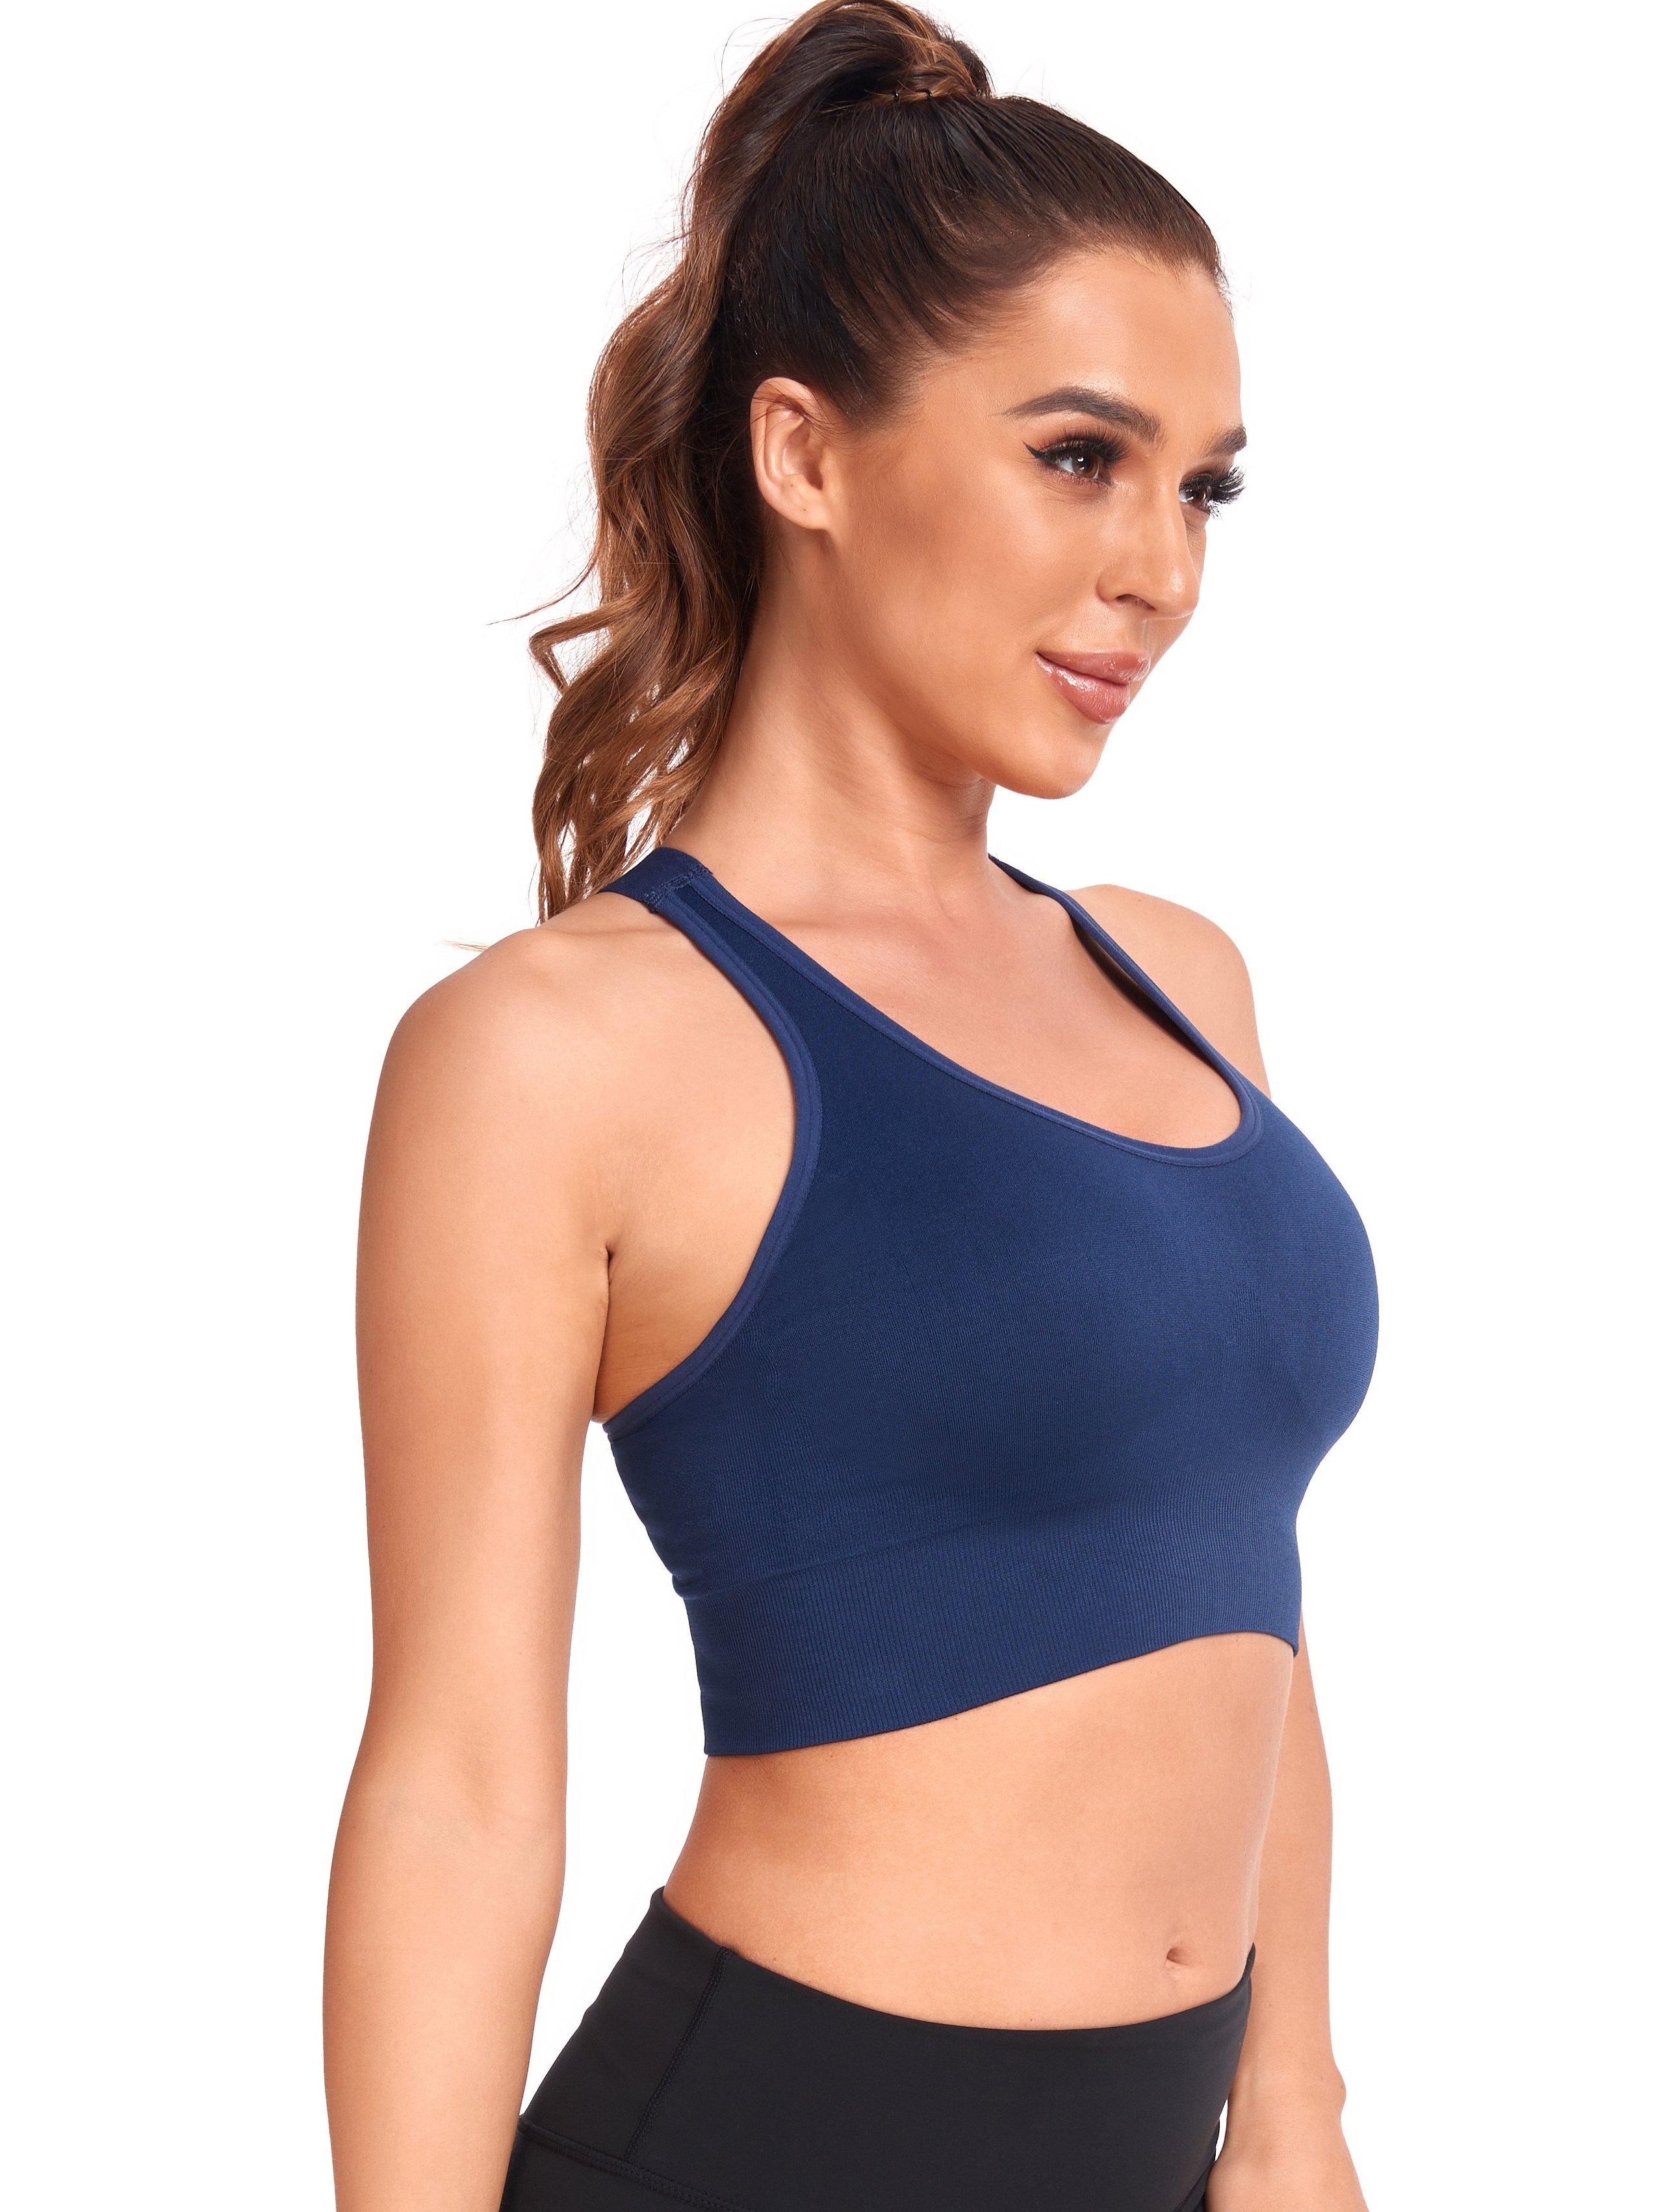  ZYLDDP Sports Bra Tank Top with Cups Women Seamless Fitness  Shirt Athletic Gym Yoga High Impact Padded Sports Vest (Color : Blue, Size  : 46D) : Clothing, Shoes & Jewelry